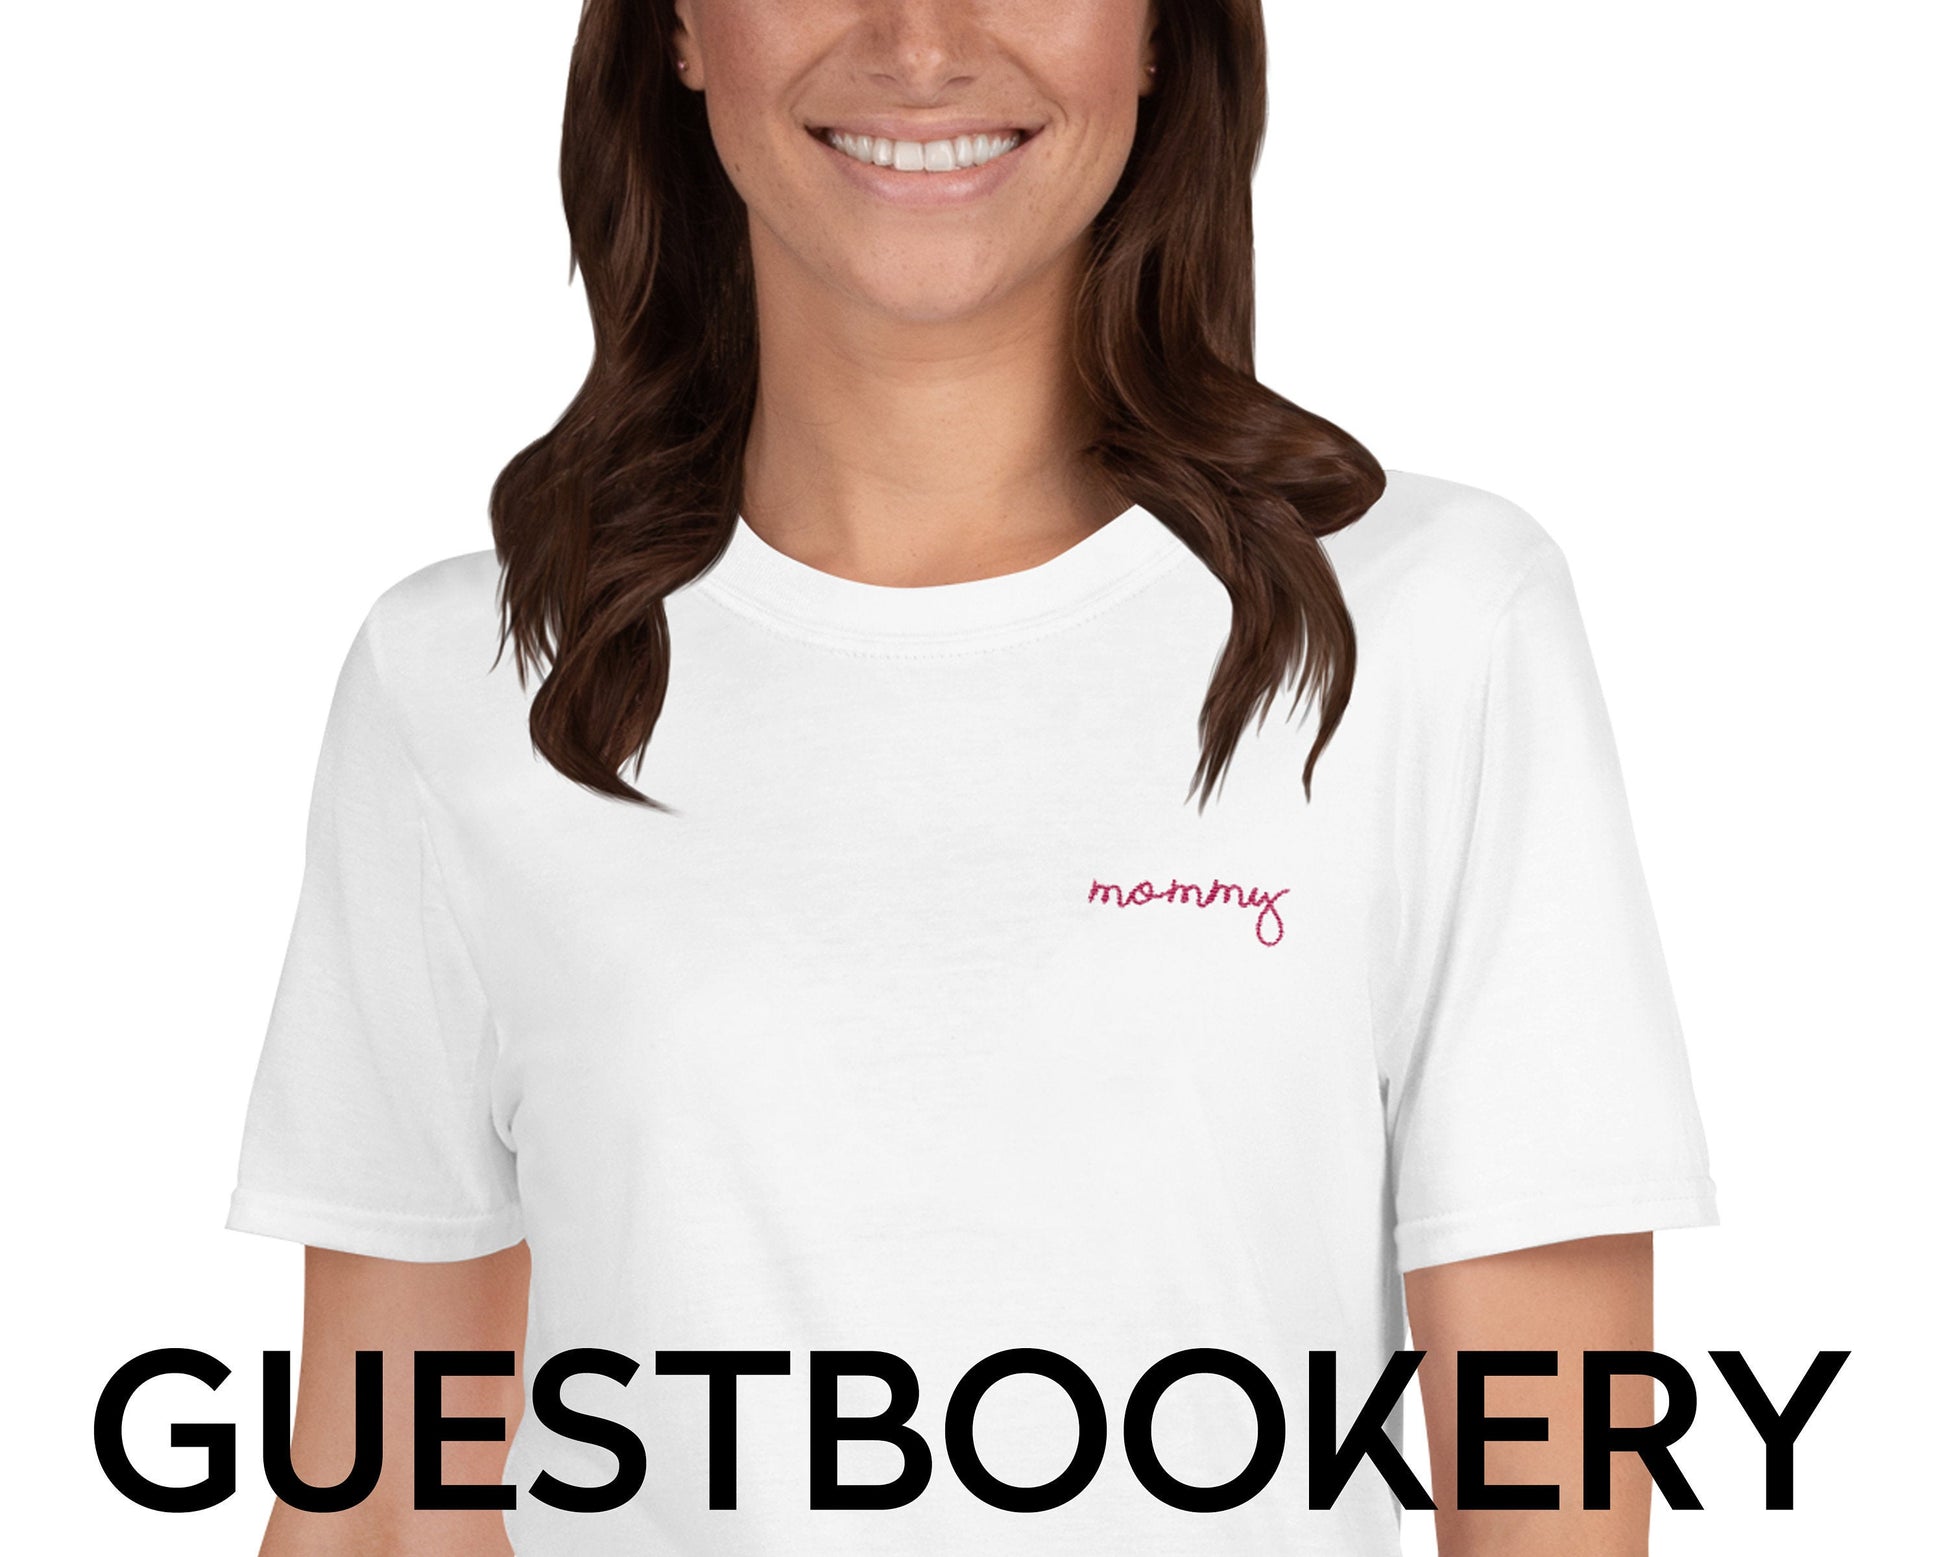 Mommy EMBROIDERED T-shirt